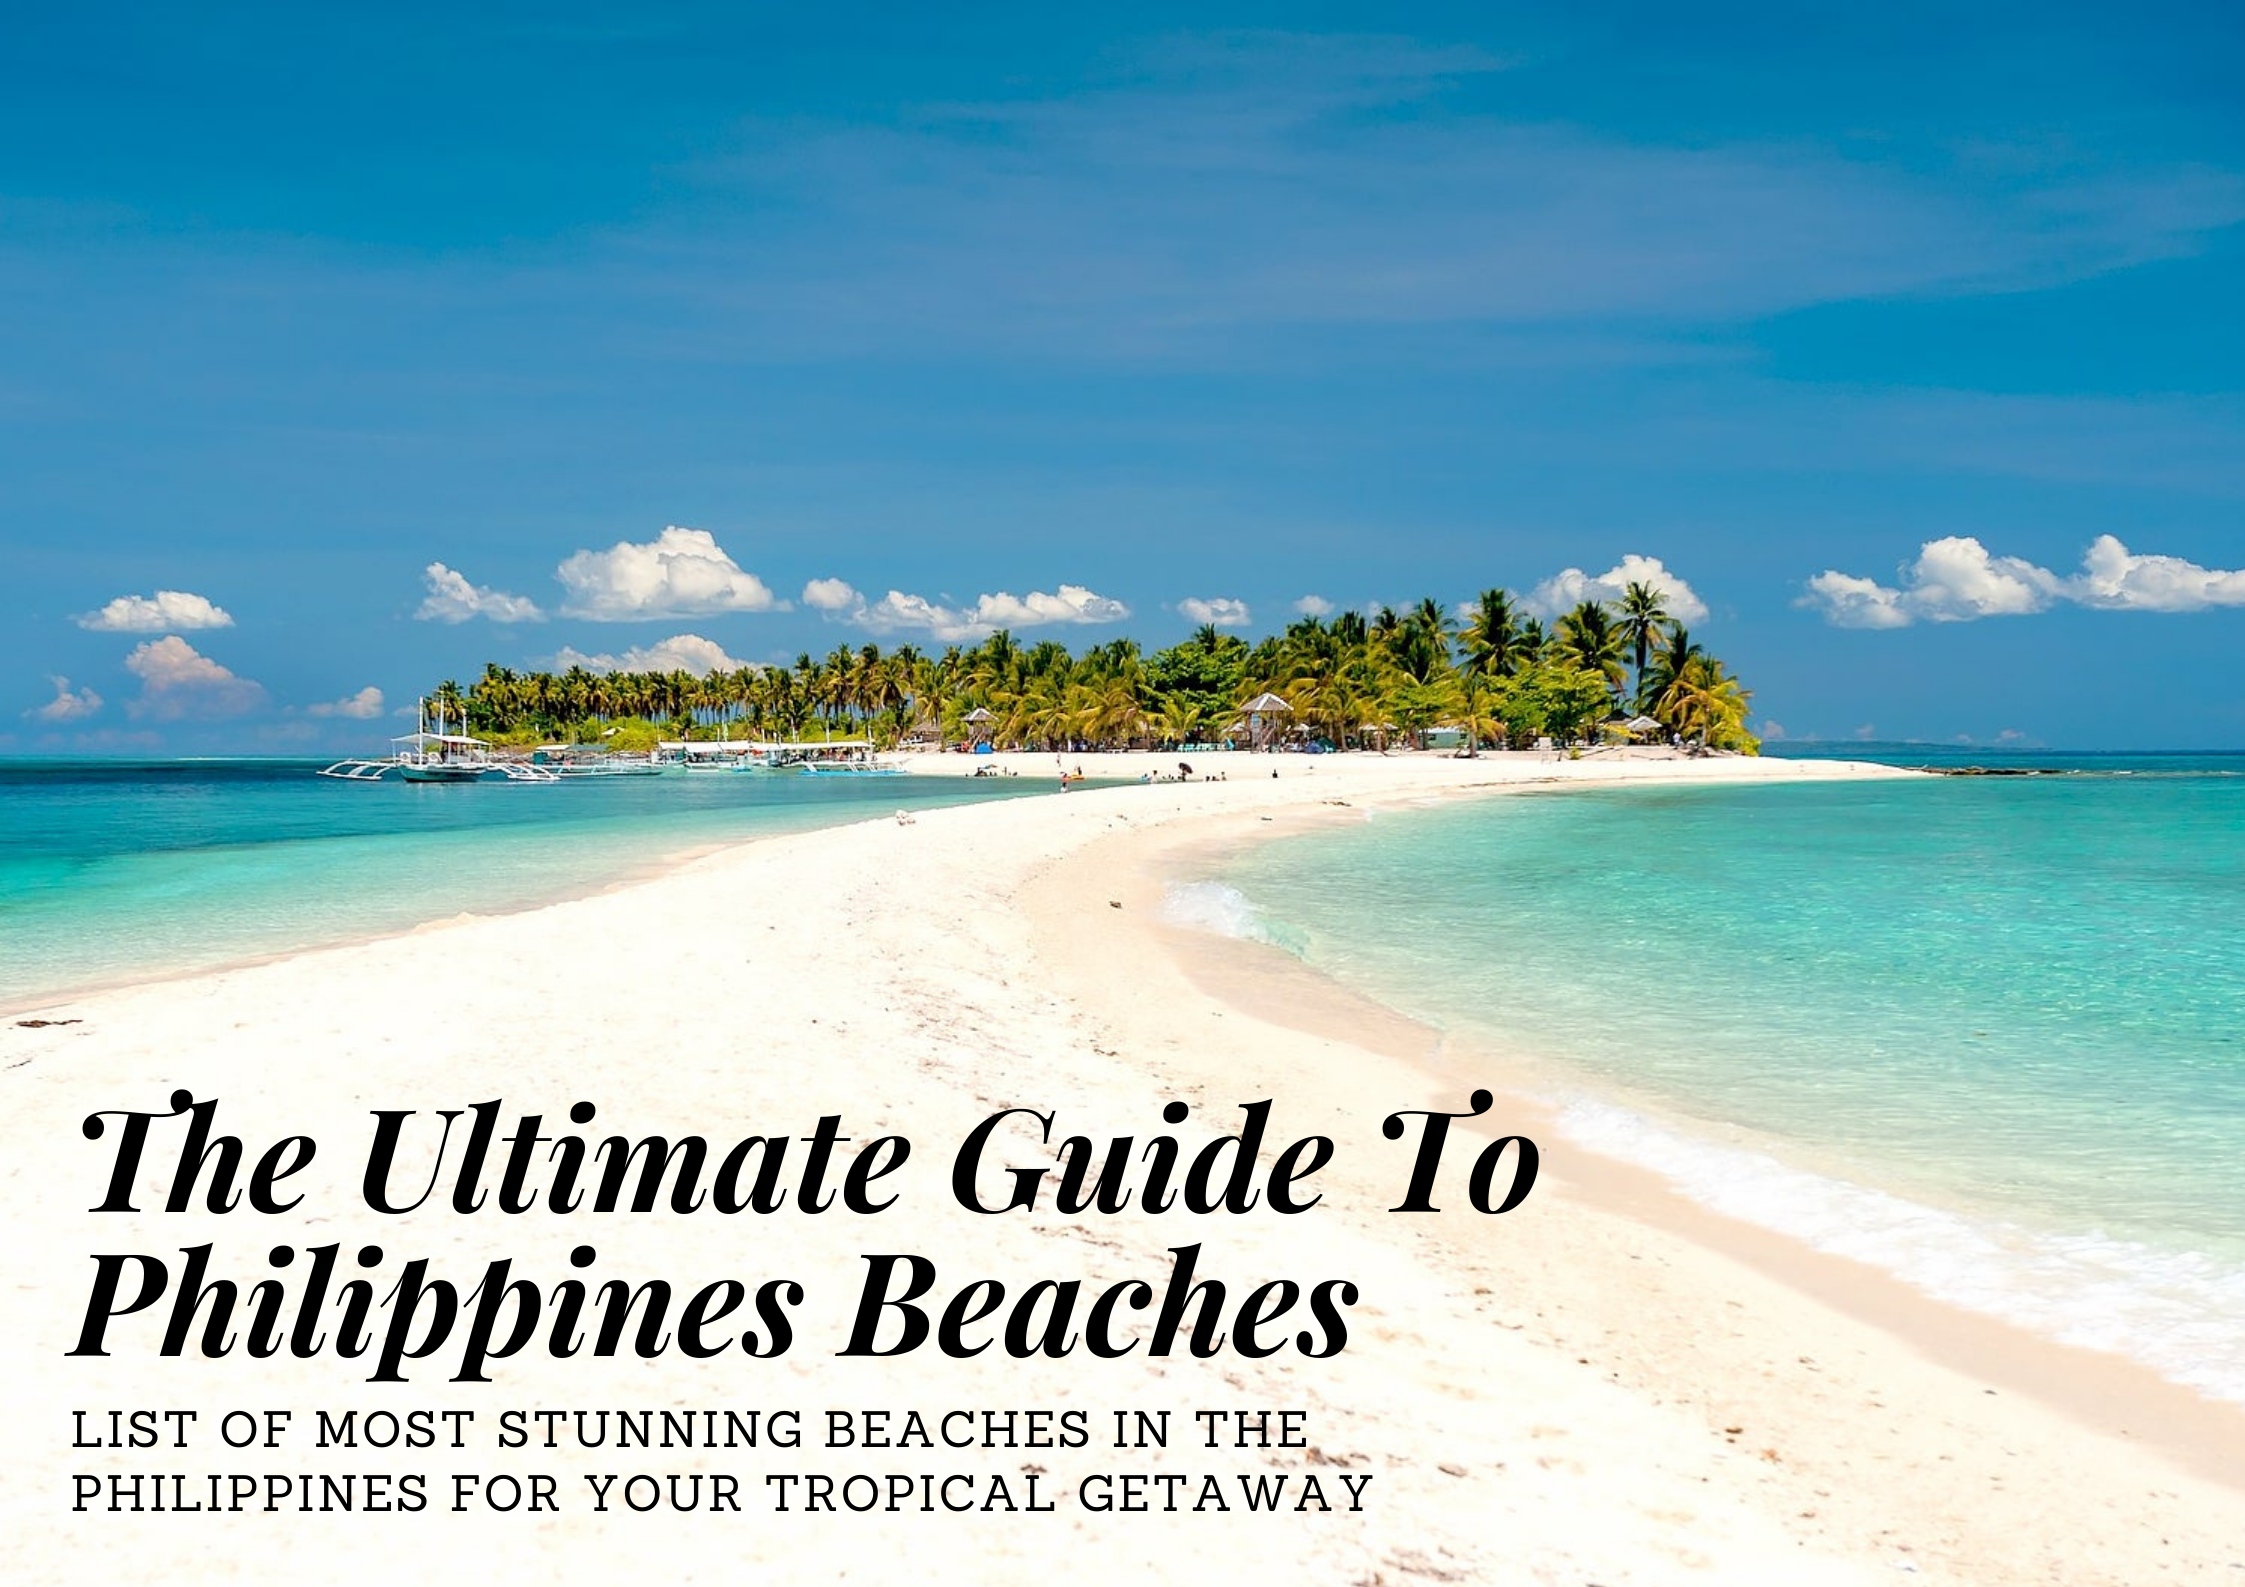 The Ultimate Guide To Philippines Beaches - List Of Most Stunning Beaches In The Country For Your Tropical Getaway